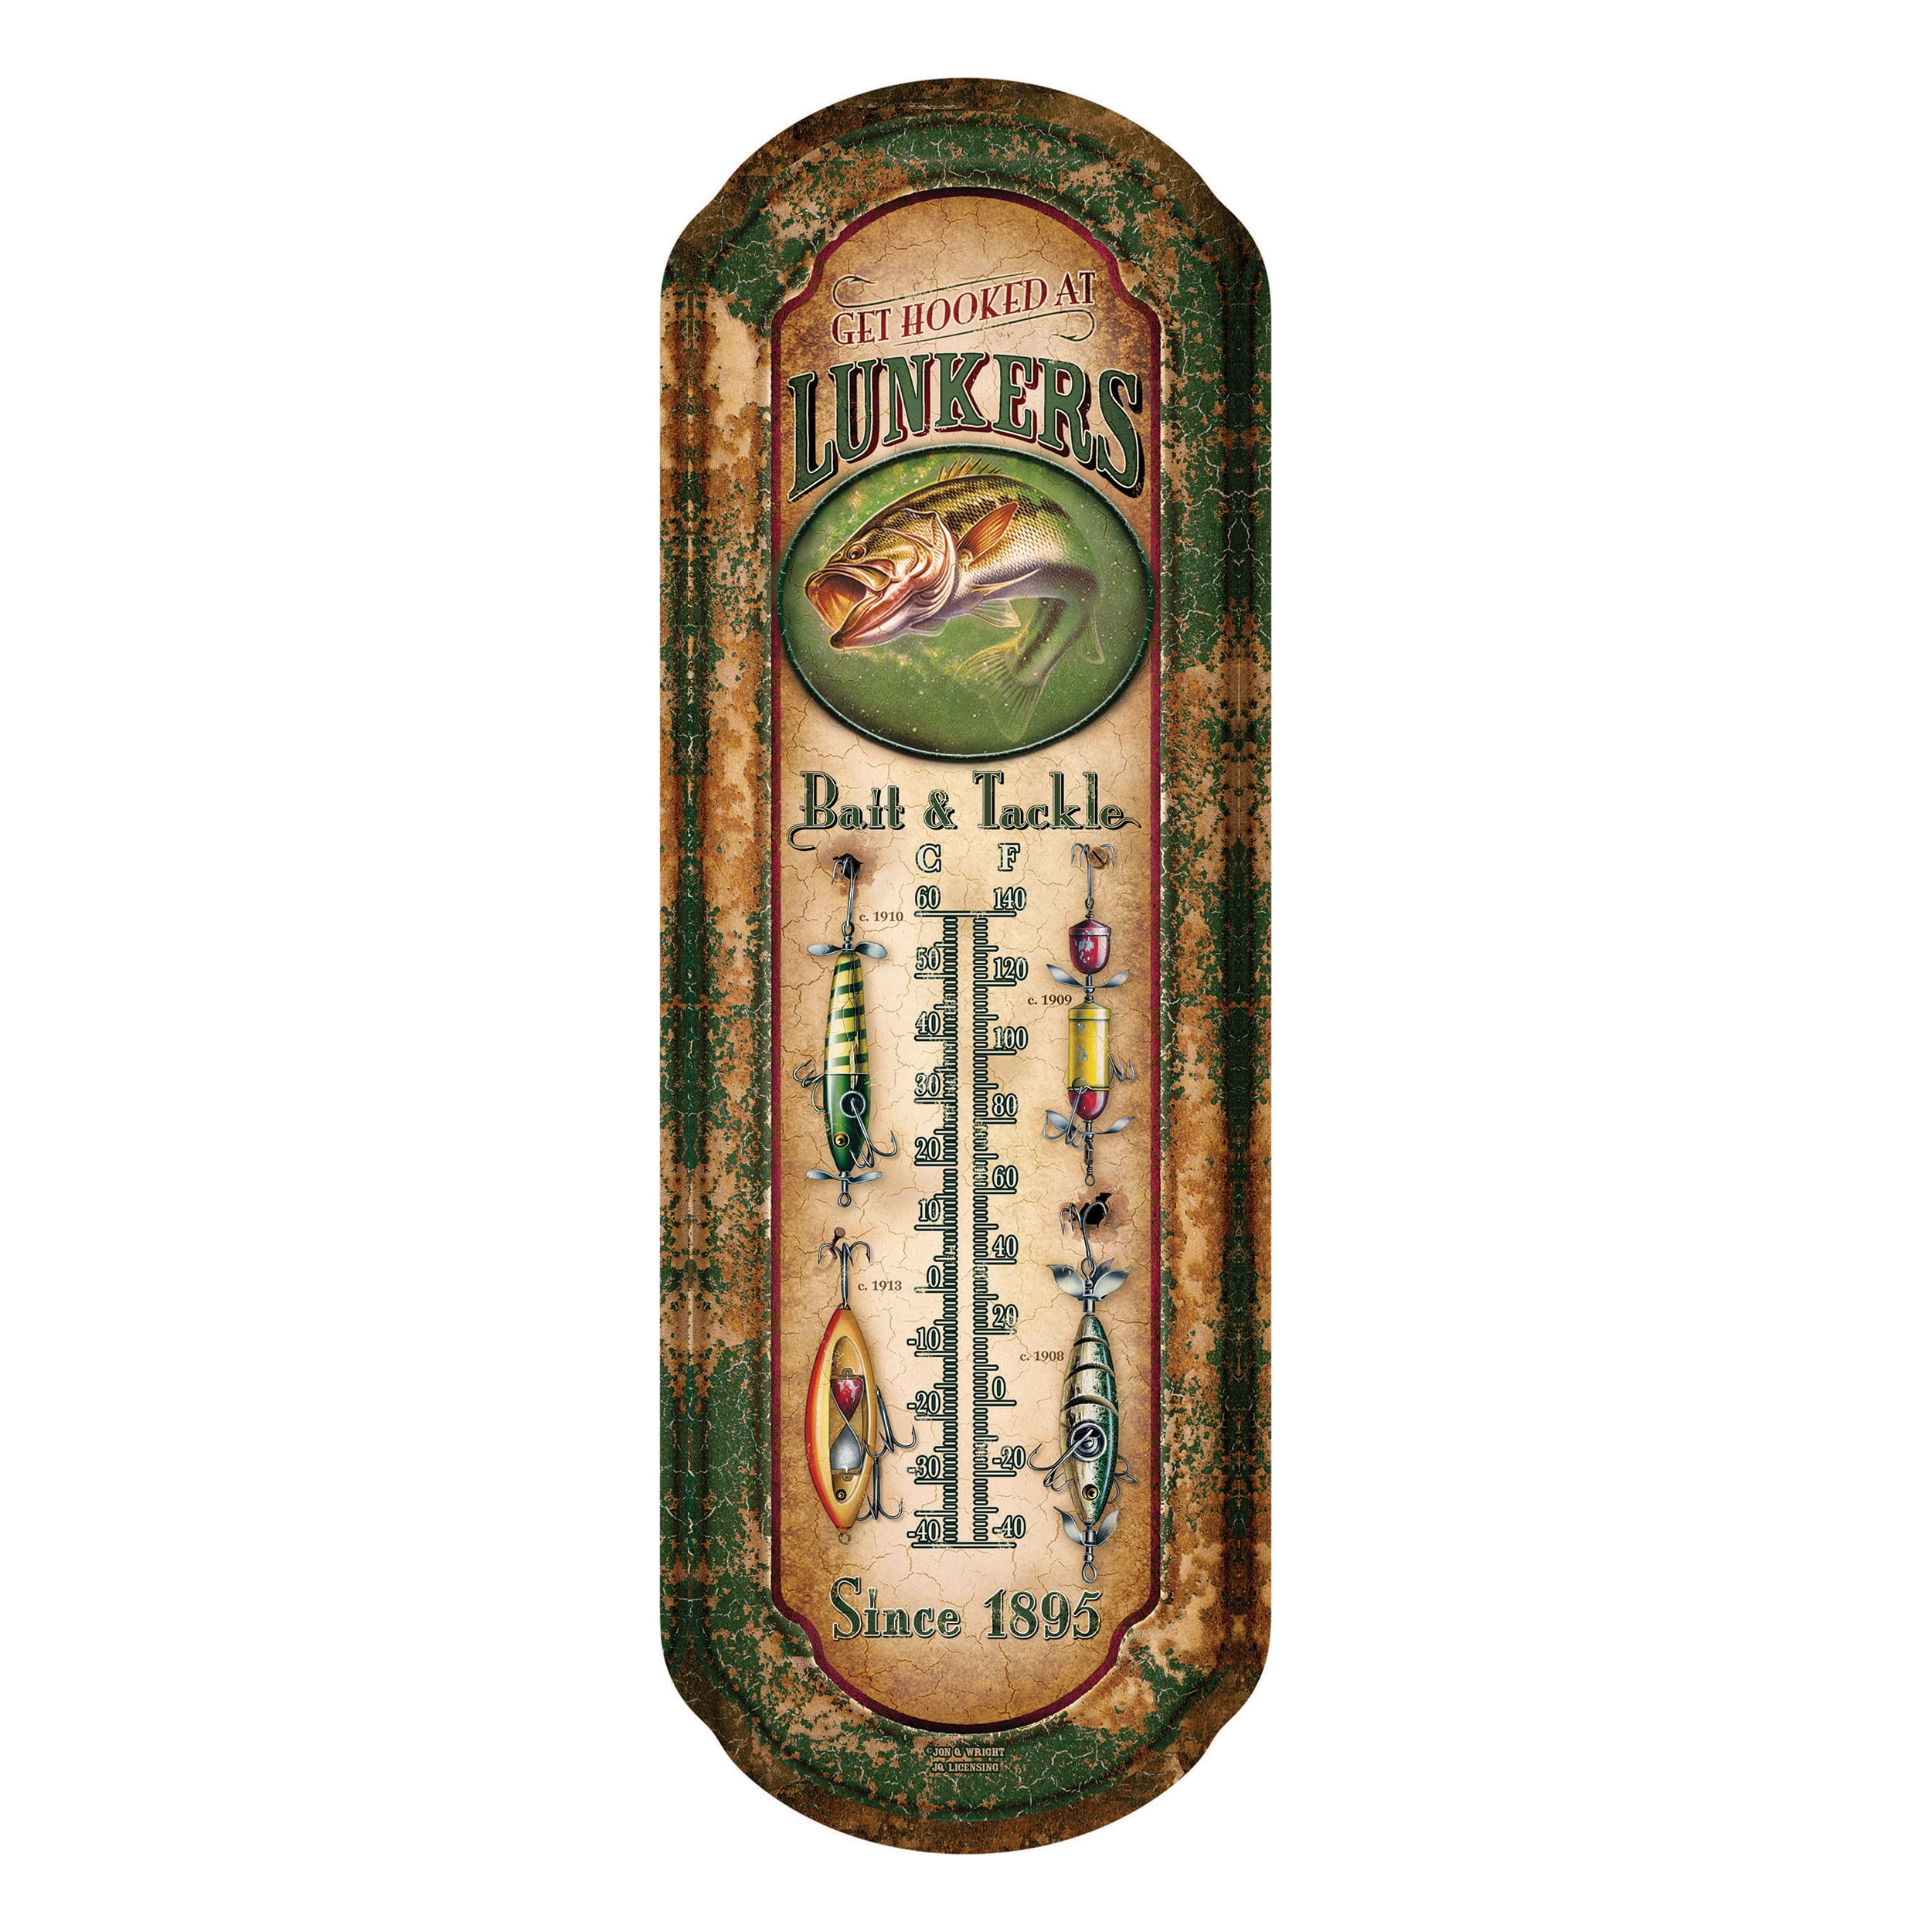 Heavy Duty Indoor/Outdoor Thermometer w/ Humidity Gauge - River Country LLC